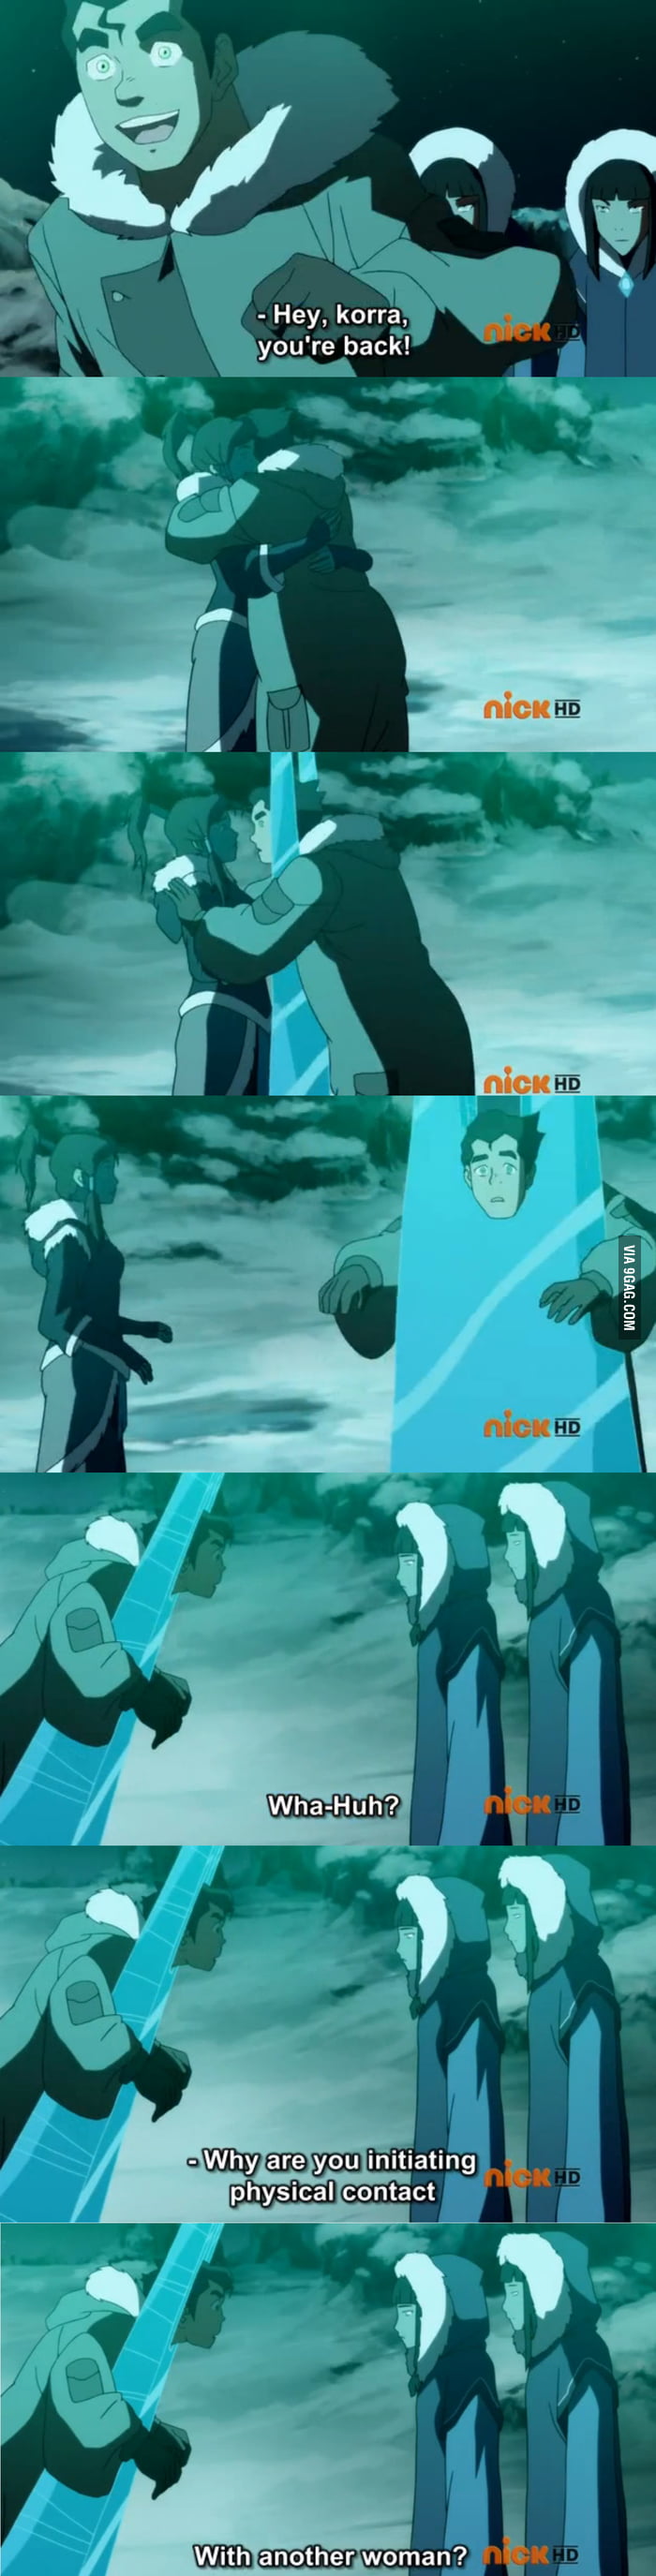 Overly attached girlfriend of Bolin from Legend of Korra - 9GAG